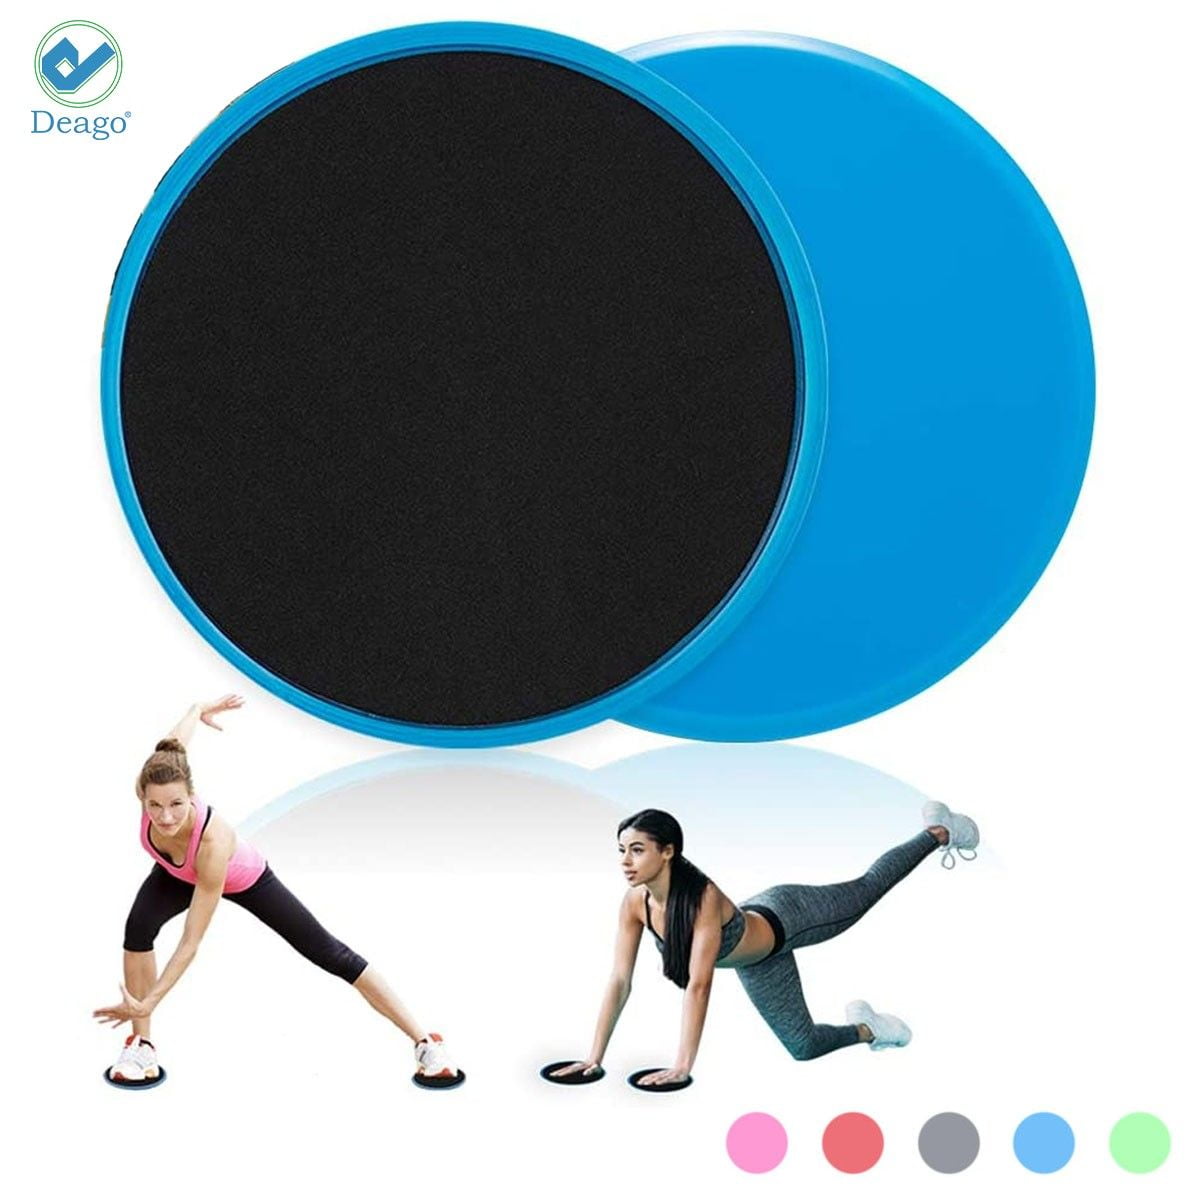 Home Abdominal & Total Body Workout Equipment 2pcs Core Exercise Sliders Sliding Gliding Discs for Gym